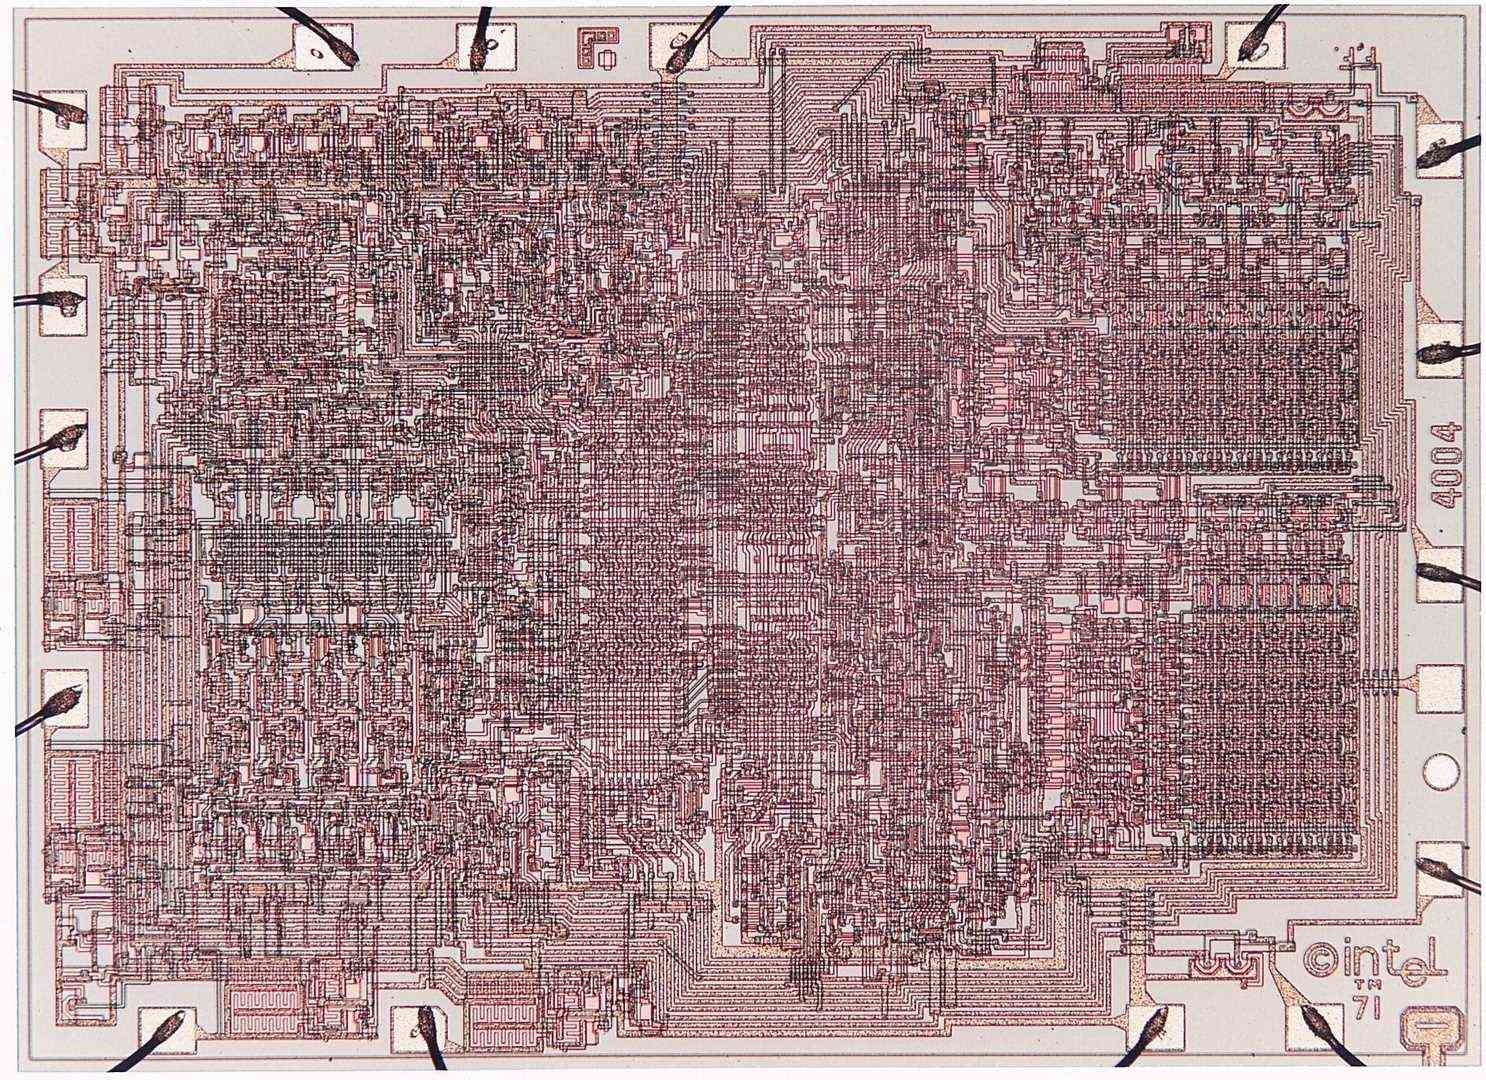 The Intel 4004 with 2,300 transistors